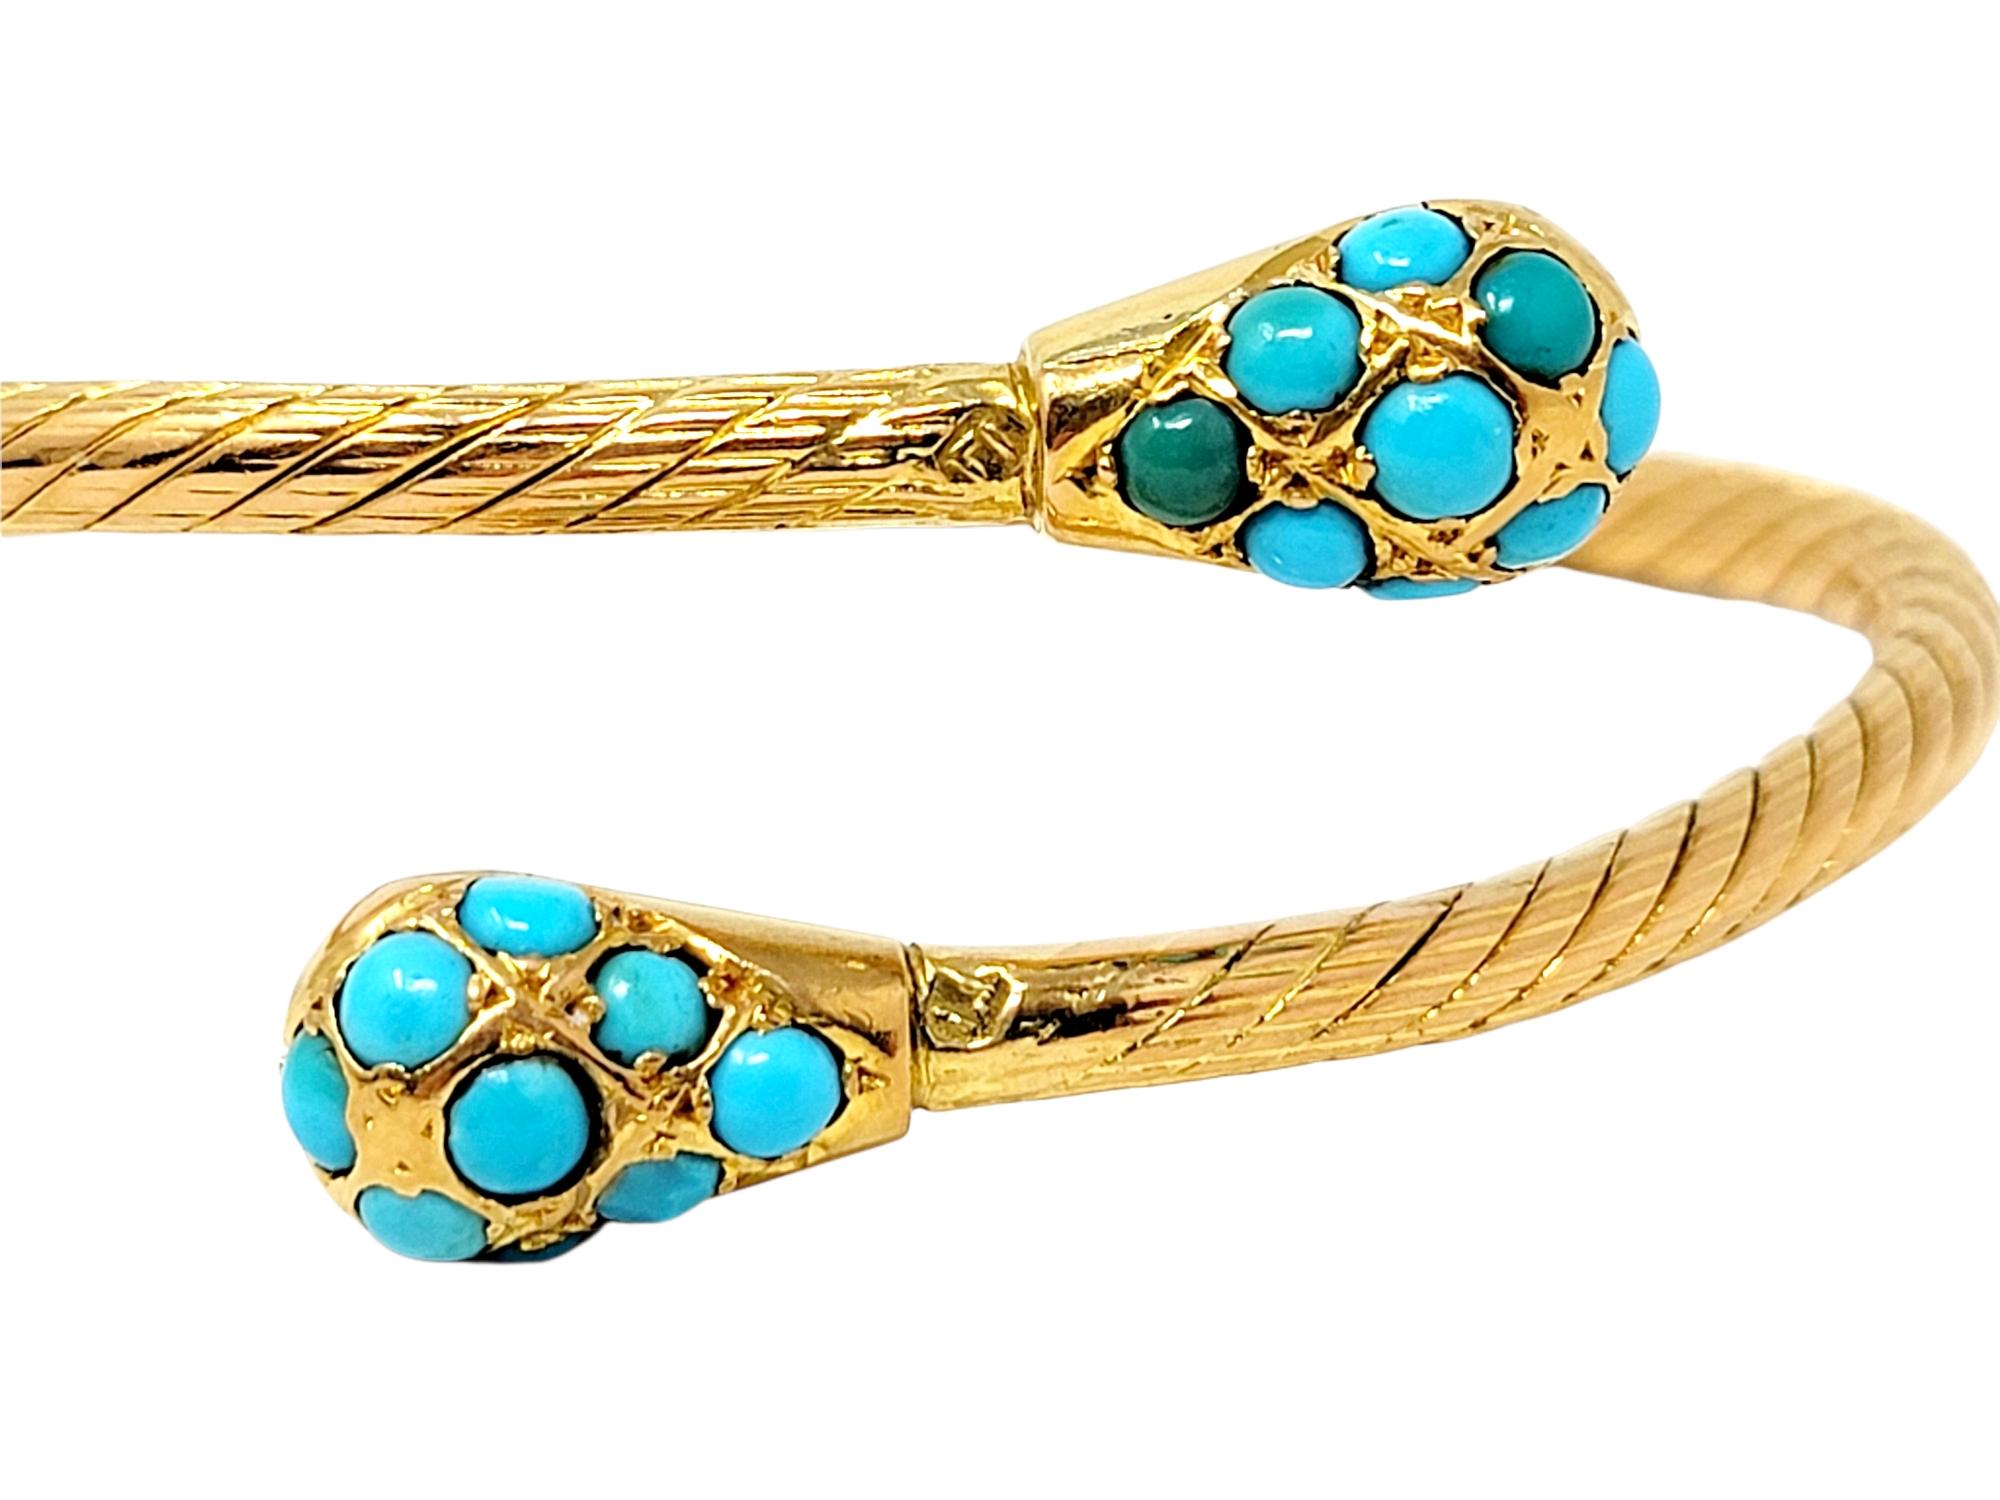 Natural Turquoise Cabochon Bypass Bangle Bracelet in 18 Karat Yellow Gold In Good Condition For Sale In Scottsdale, AZ